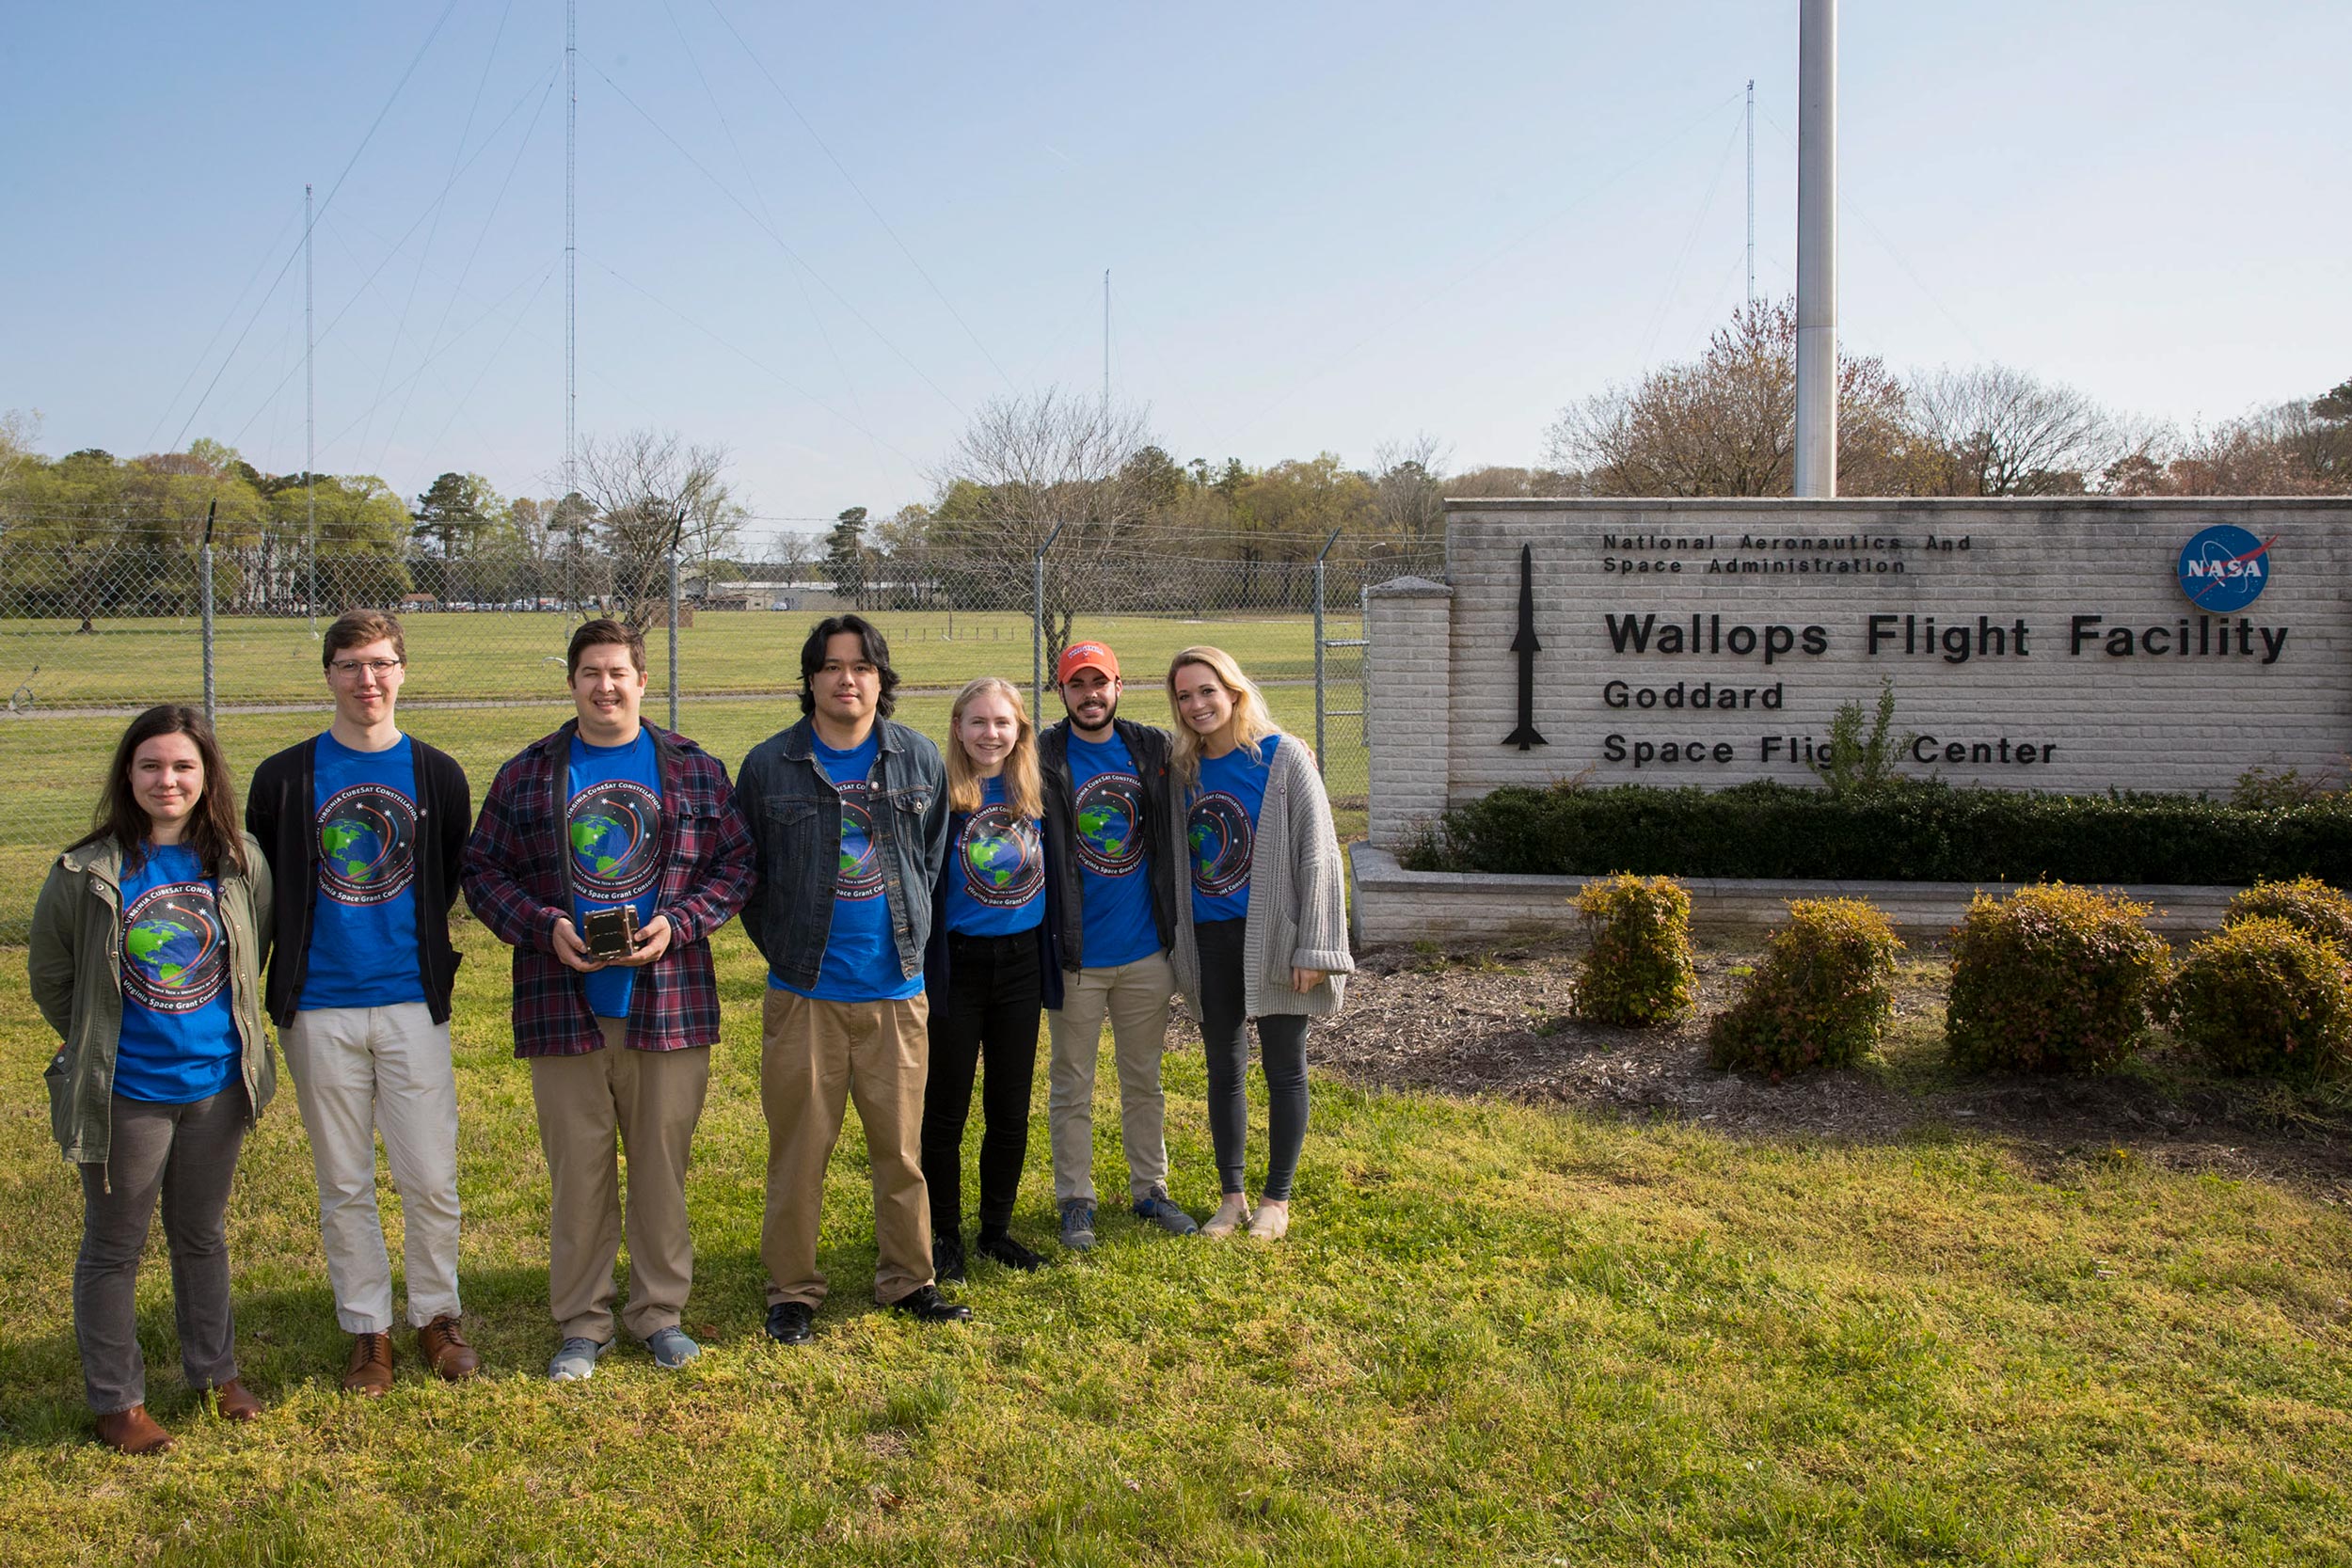 Group stands in front of the Wallops Flight Facility in Virginia for a photo. left to right: Erin Puckette, Wyatt Wilson, Trace LaCour, Justin Javier, Hannah Umansky, Connor Segal and Kathryn Wason